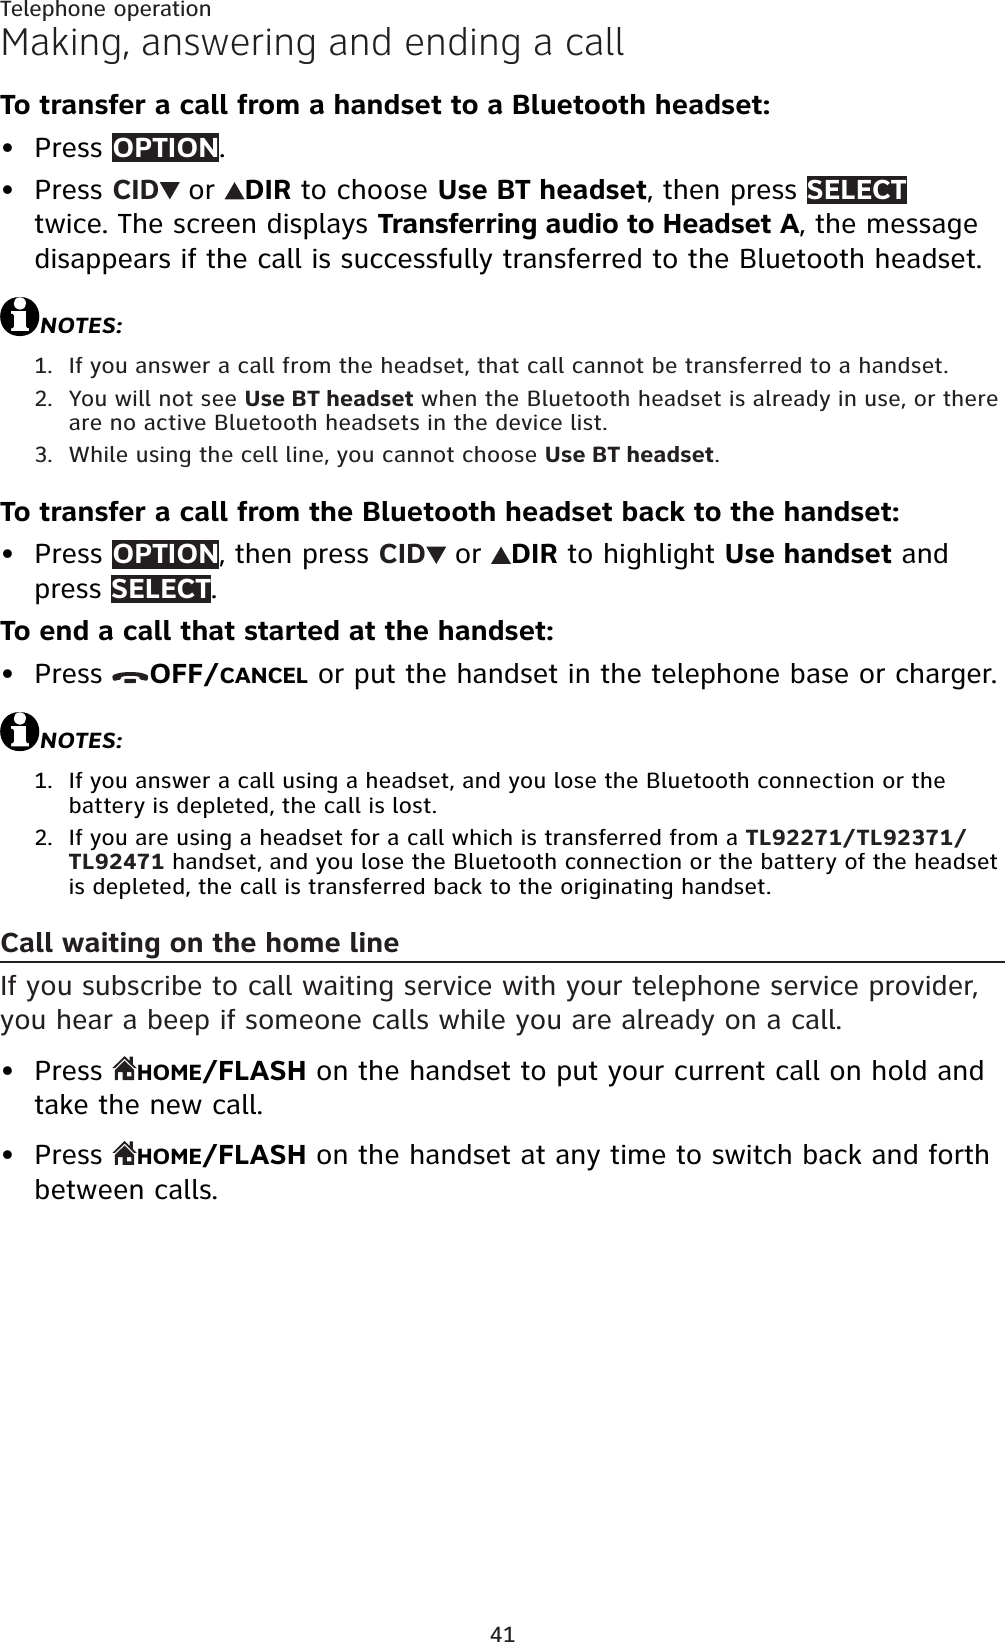 41Telephone operationMaking, answering and ending a callTo transfer a call from a handset to a Bluetooth headset:Press OPTION.Press CID or DIR to choose Use BT headset, then press SELECTtwice. The screen displays Transferring audio to Headset A, the message disappears if the call is successfully transferred to the Bluetooth headset.NOTES:If you answer a call from the headset, that call cannot be transferred to a handset.You will not see Use BT headset when the Bluetooth headset is already in use, or there are no active Bluetooth headsets in the device list.While using the cell line, you cannot choose Use BT headset.To transfer a call from the Bluetooth headset back to the handset:Press OPTION, then press CID or DIR to highlight Use handset and press SELECT.To end a call that started at the handset:Press  OFF/CANCEL or put the handset in the telephone base or charger.NOTES:If you answer a call using a headset, and you lose the Bluetooth connection or the battery is depleted, the call is lost.If you are using a headset for a call which is transferred from a TL92271/TL92371/TL92471 handset, and you lose the Bluetooth connection or the battery of the headset is depleted, the call is transferred back to the originating handset.Call waiting on the home lineIf you subscribe to call waiting service with your telephone service provider, you hear a beep if someone calls while you are already on a call.Press  HOME/FLASH on the handset to put your current call on hold and take the new call.Press  HOME/FLASH on the handset at any time to switch back and forth between calls.••1.2.3.••1.2.••